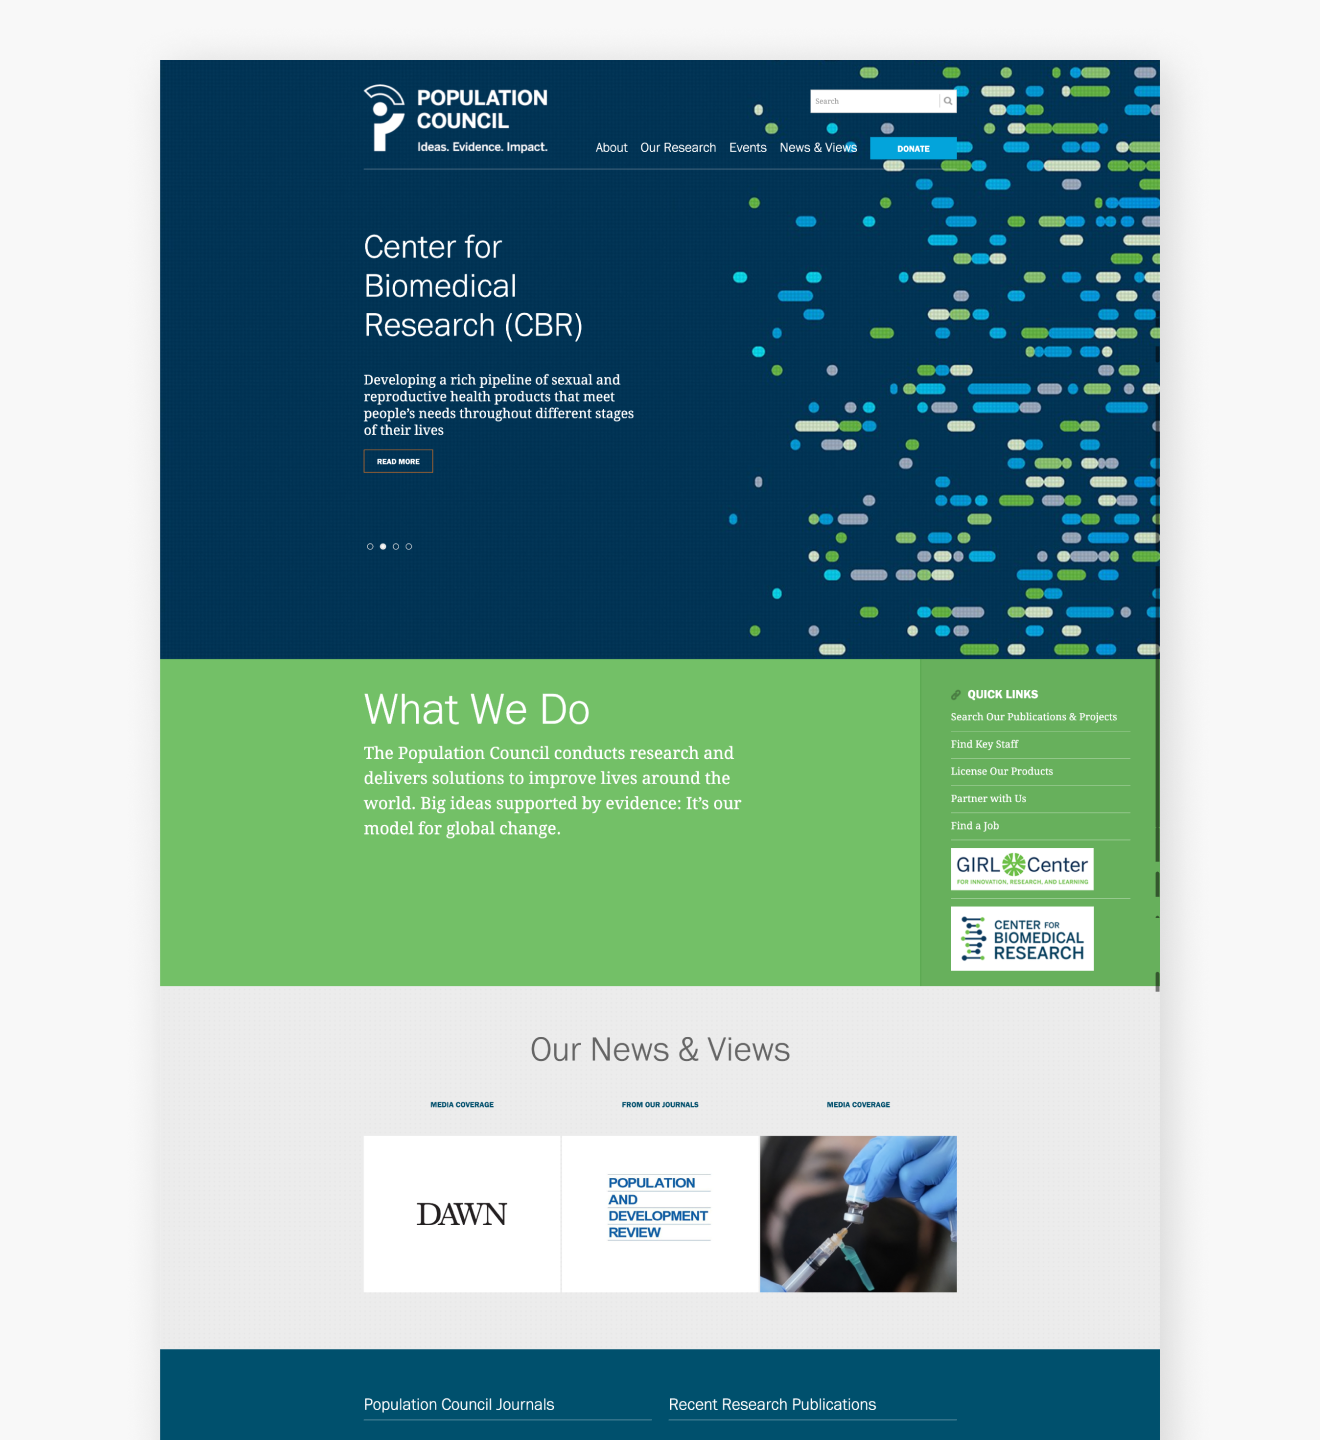 Population Council homepage after the redesign